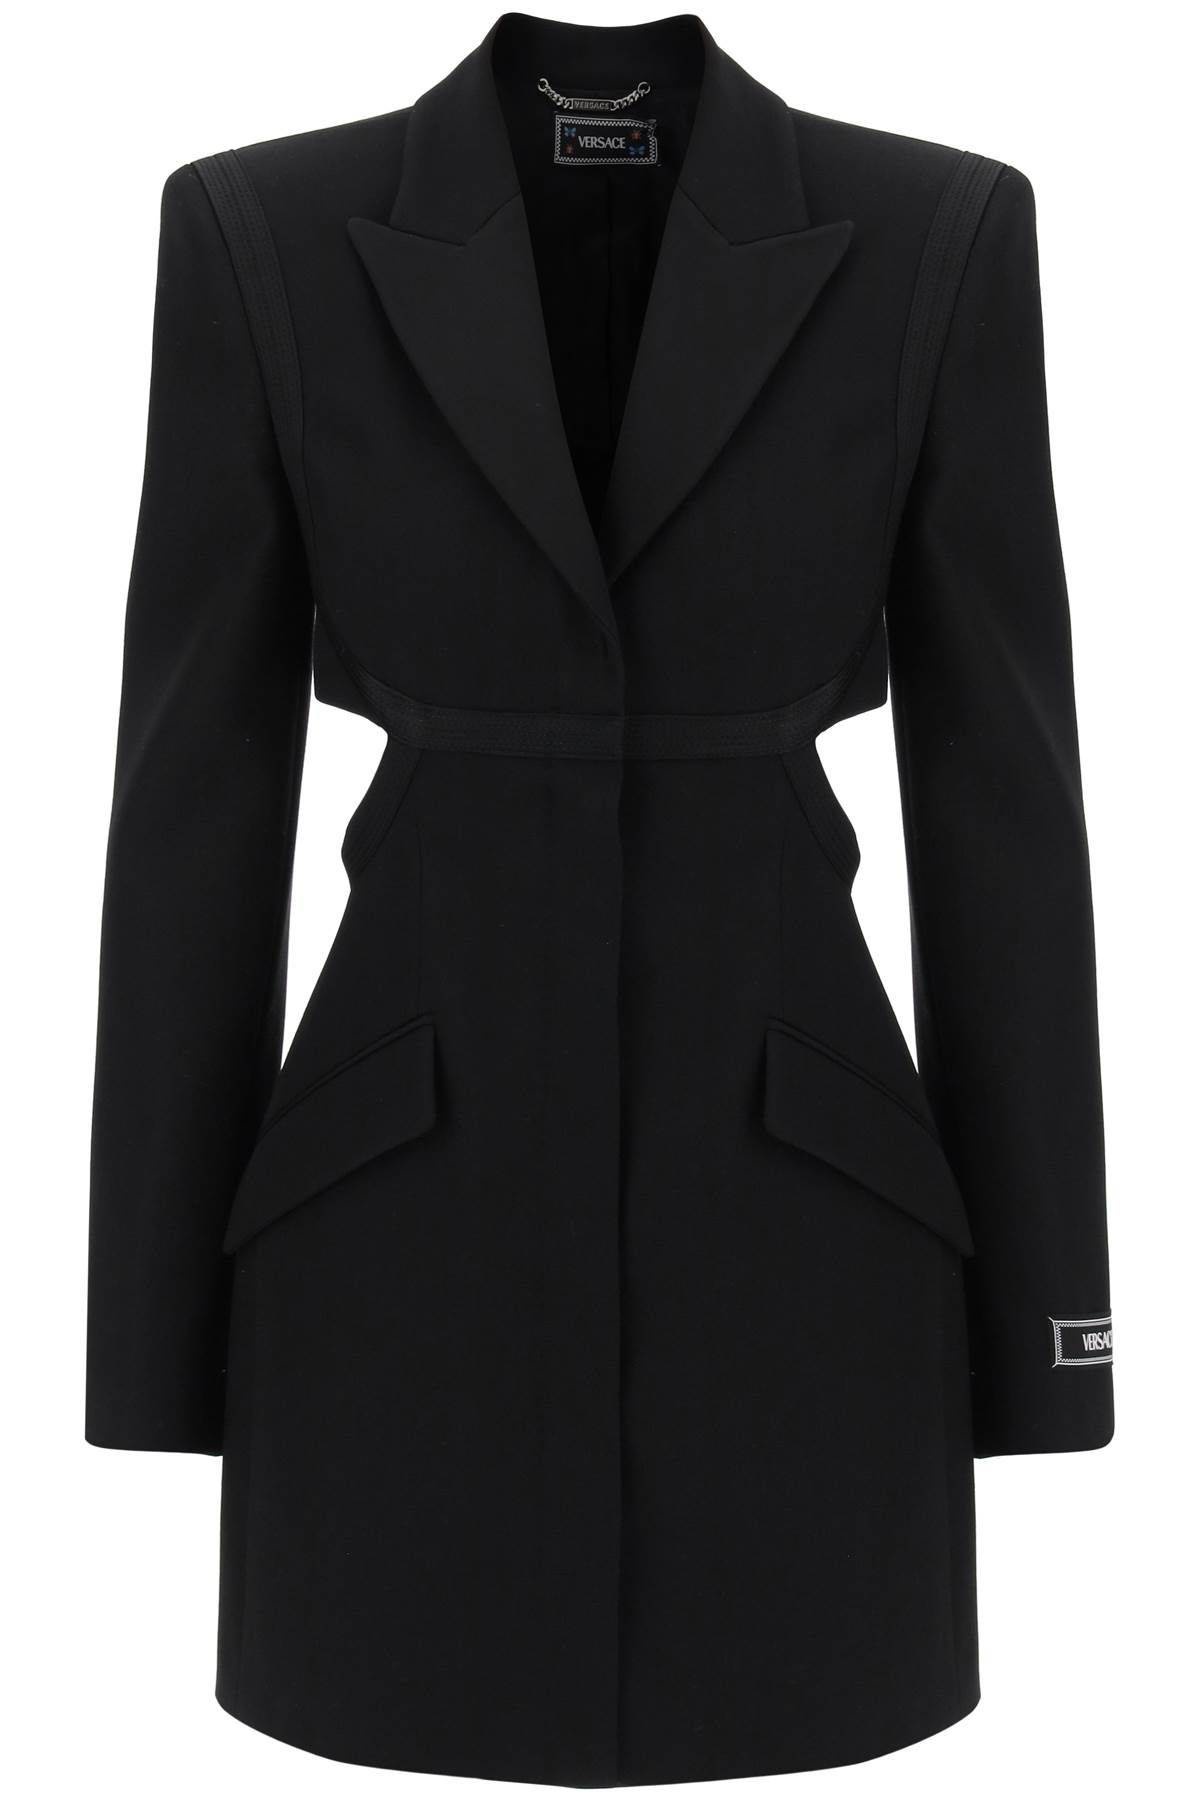 BLAZER DRESS WITH CUT-OUTS - 1